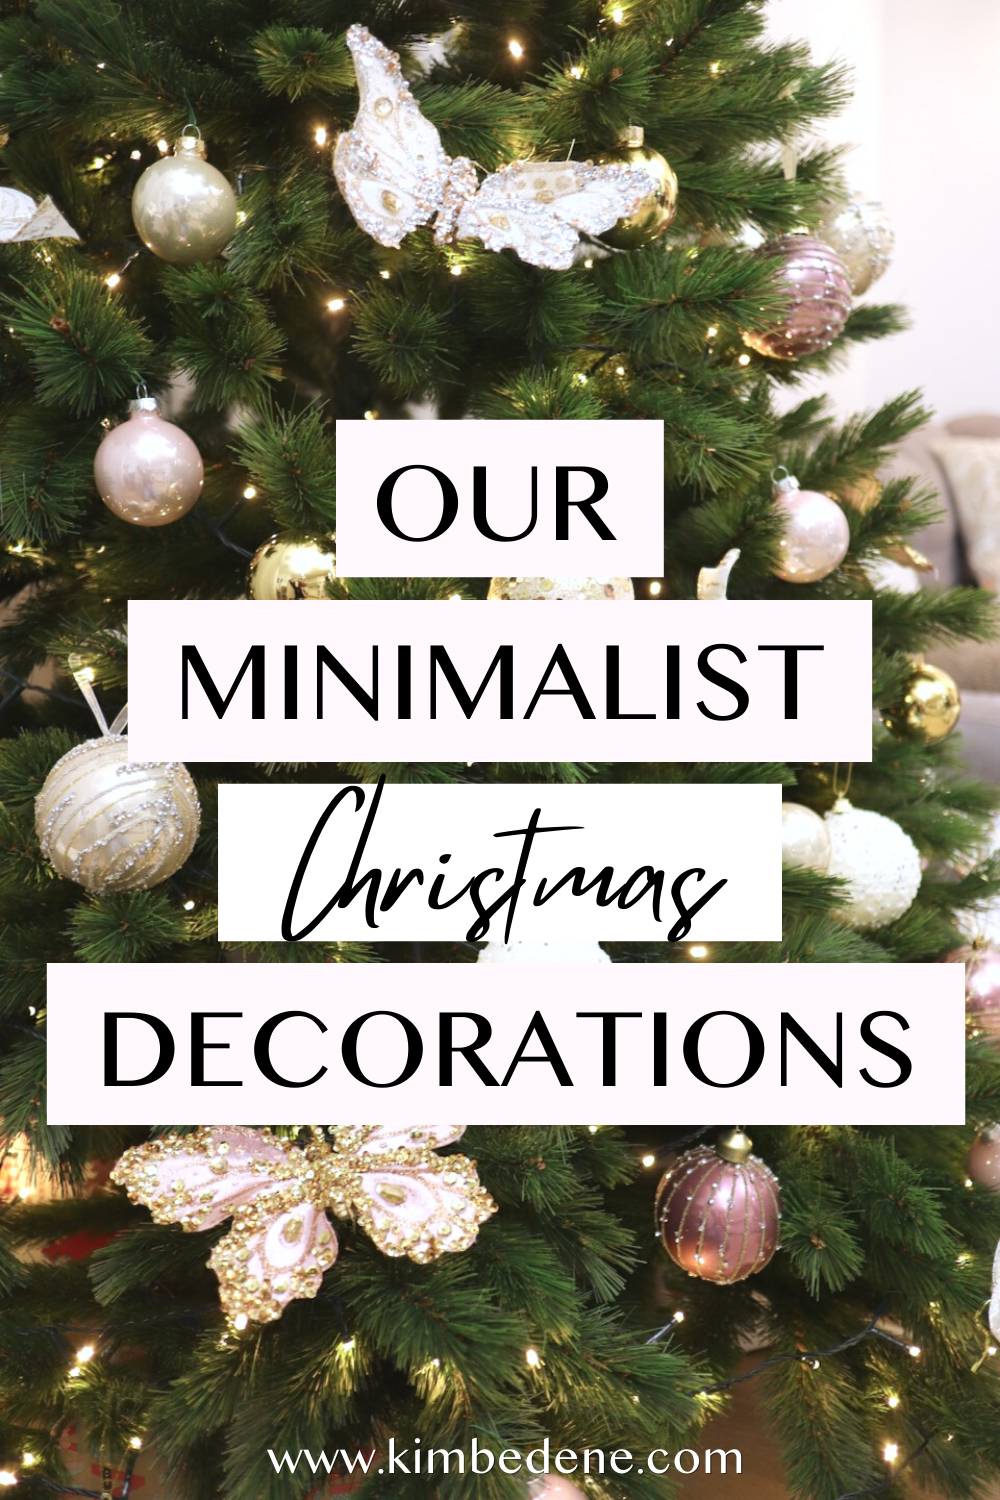 How we decorate our home for Christmas as minimalists - Kim Bedene